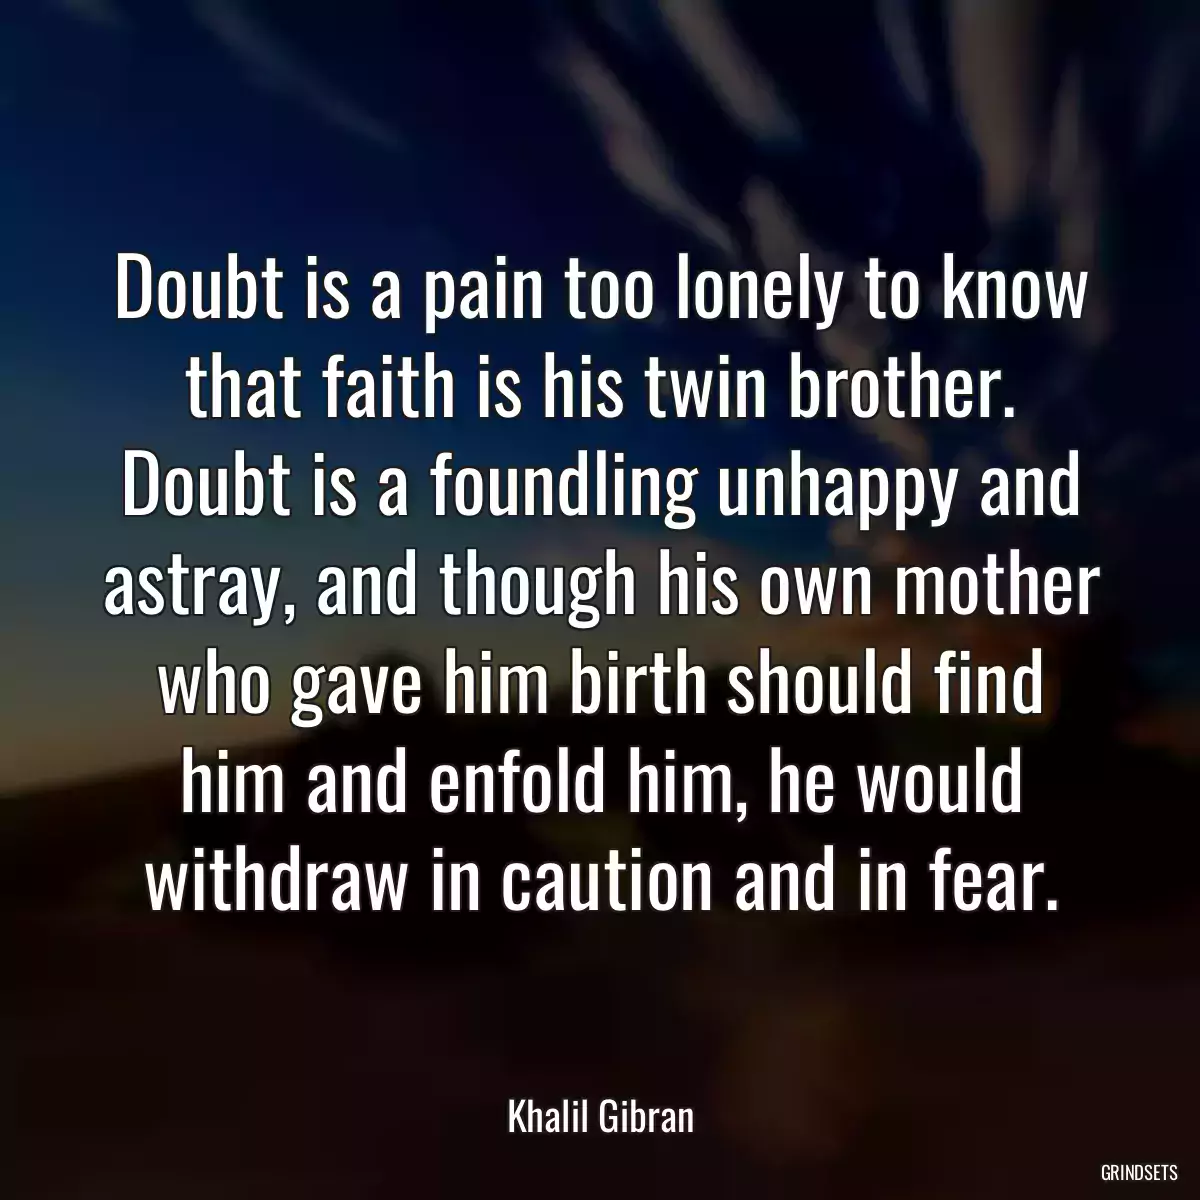 Doubt is a pain too lonely to know that faith is his twin brother. Doubt is a foundling unhappy and astray, and though his own mother who gave him birth should find him and enfold him, he would withdraw in caution and in fear.